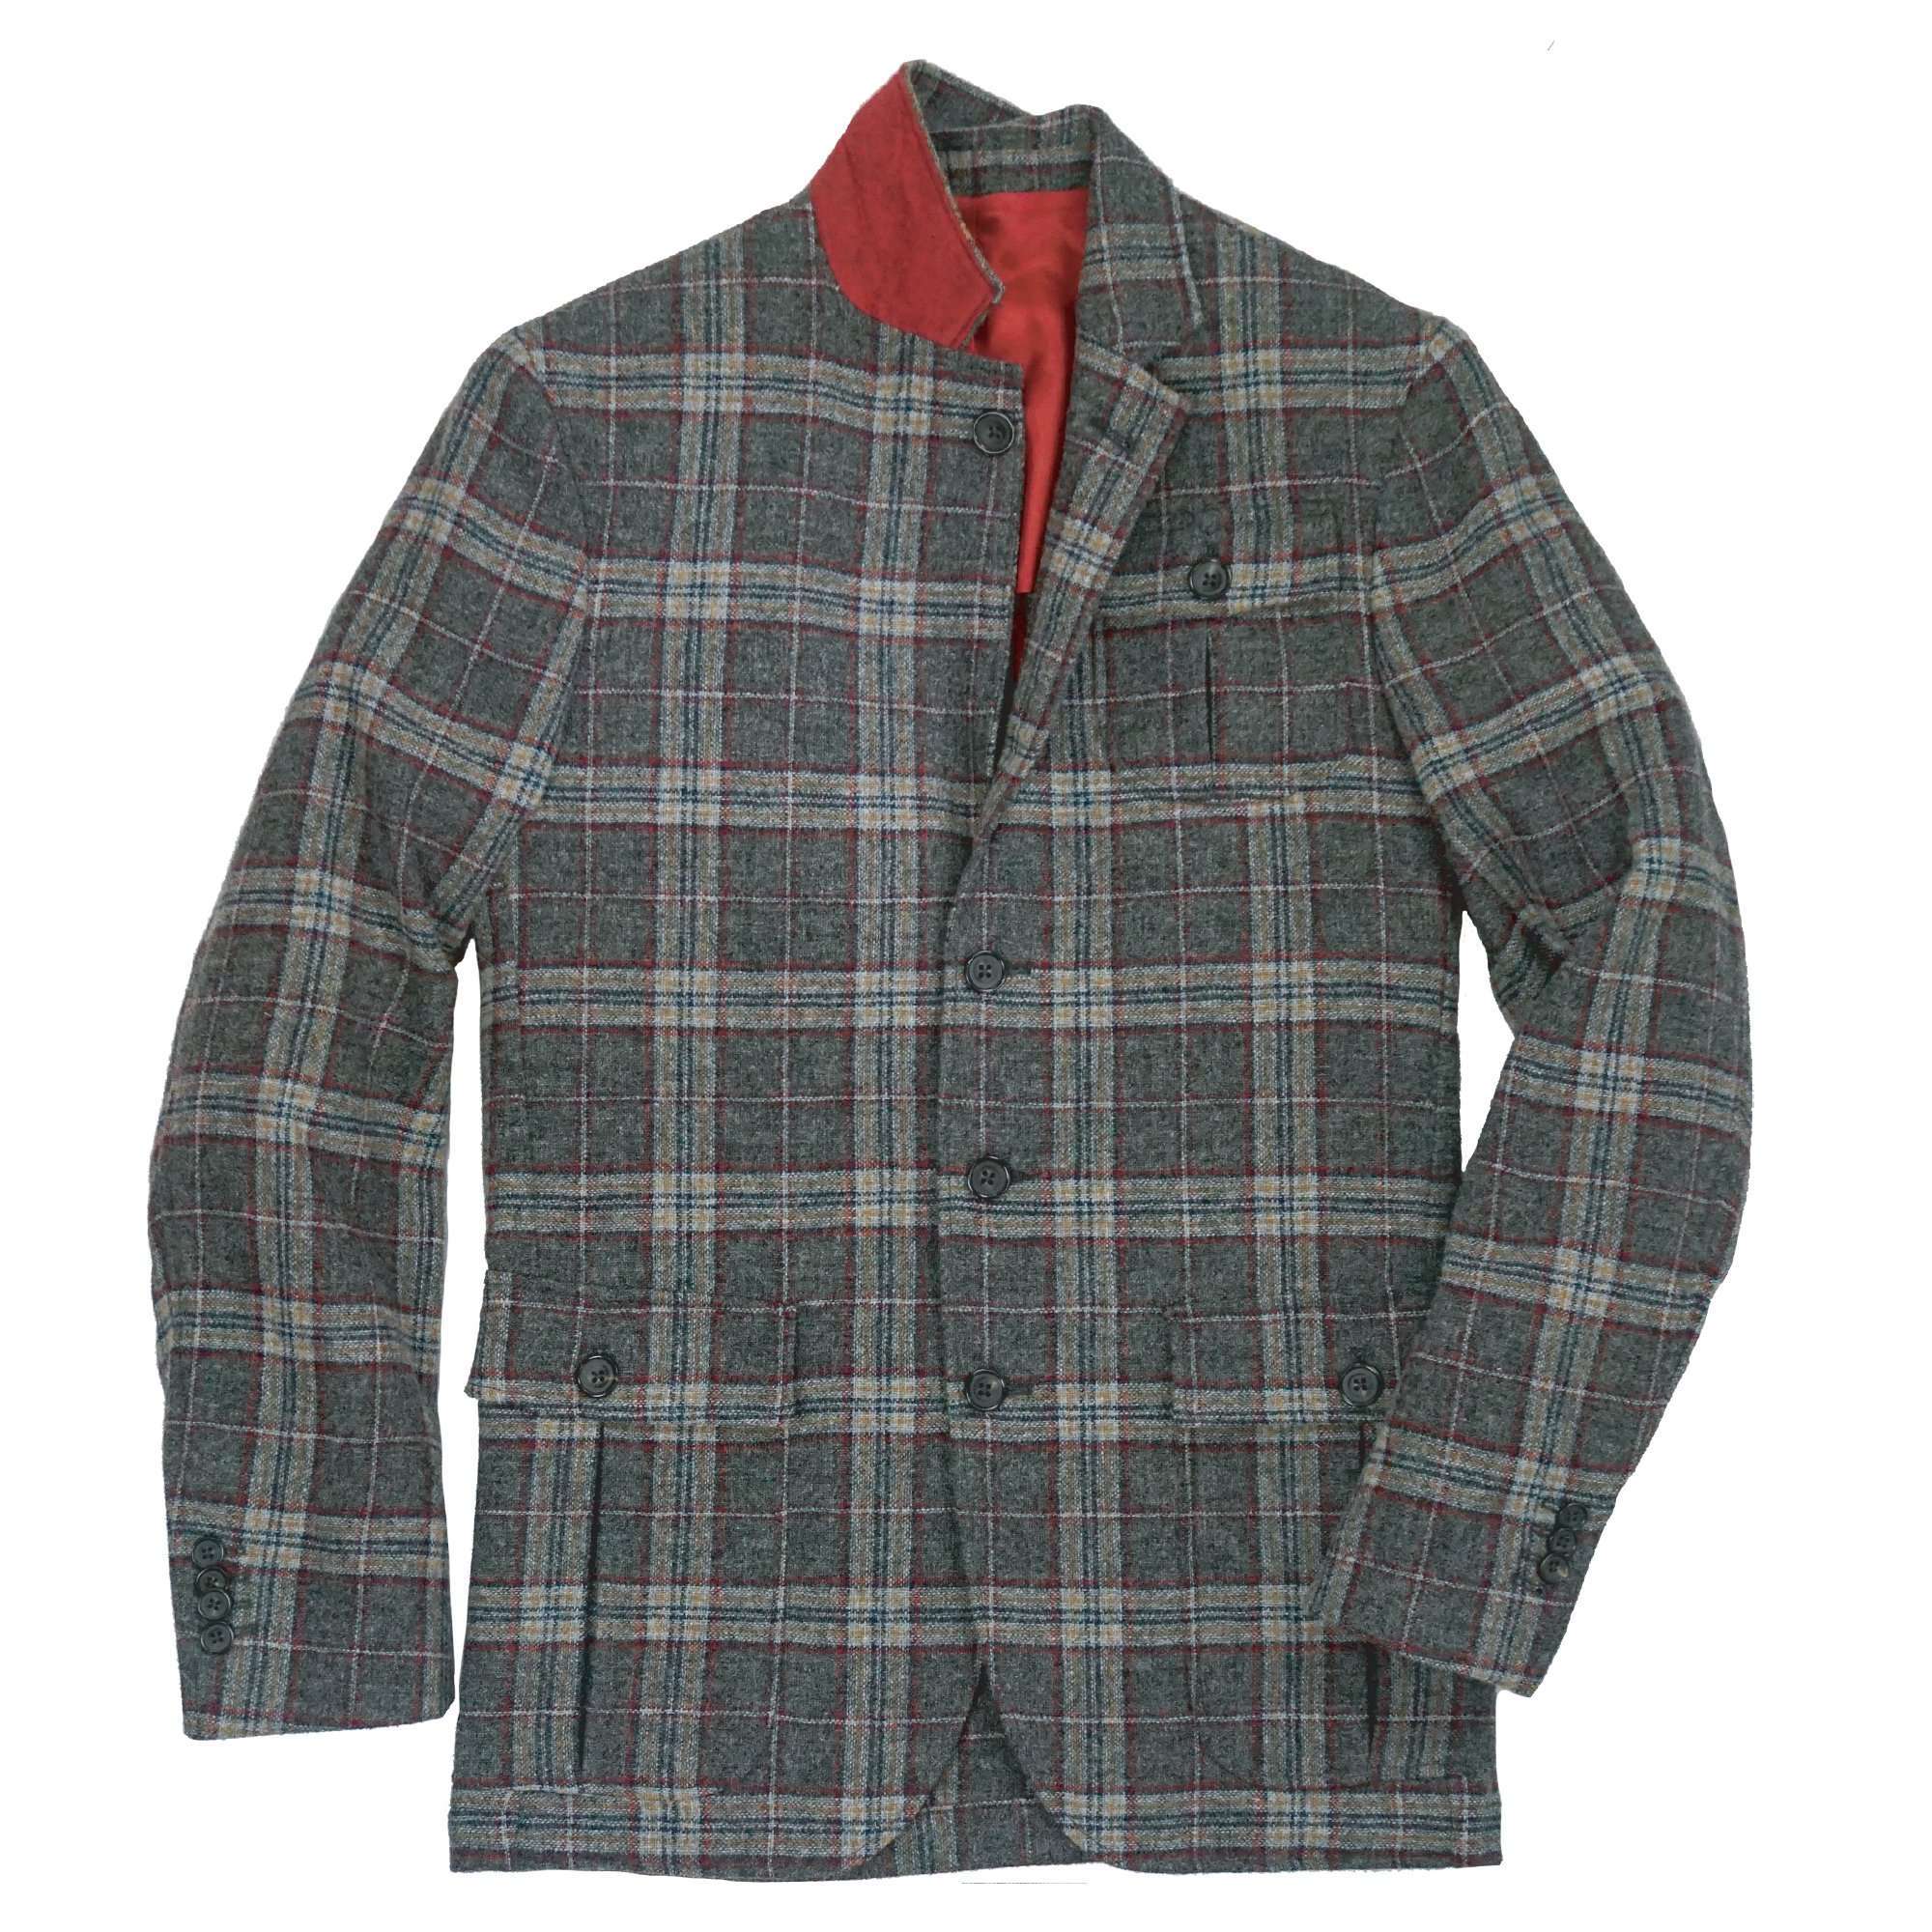 Southern Proper - Gentleman's Hacking Jacket: Reviere